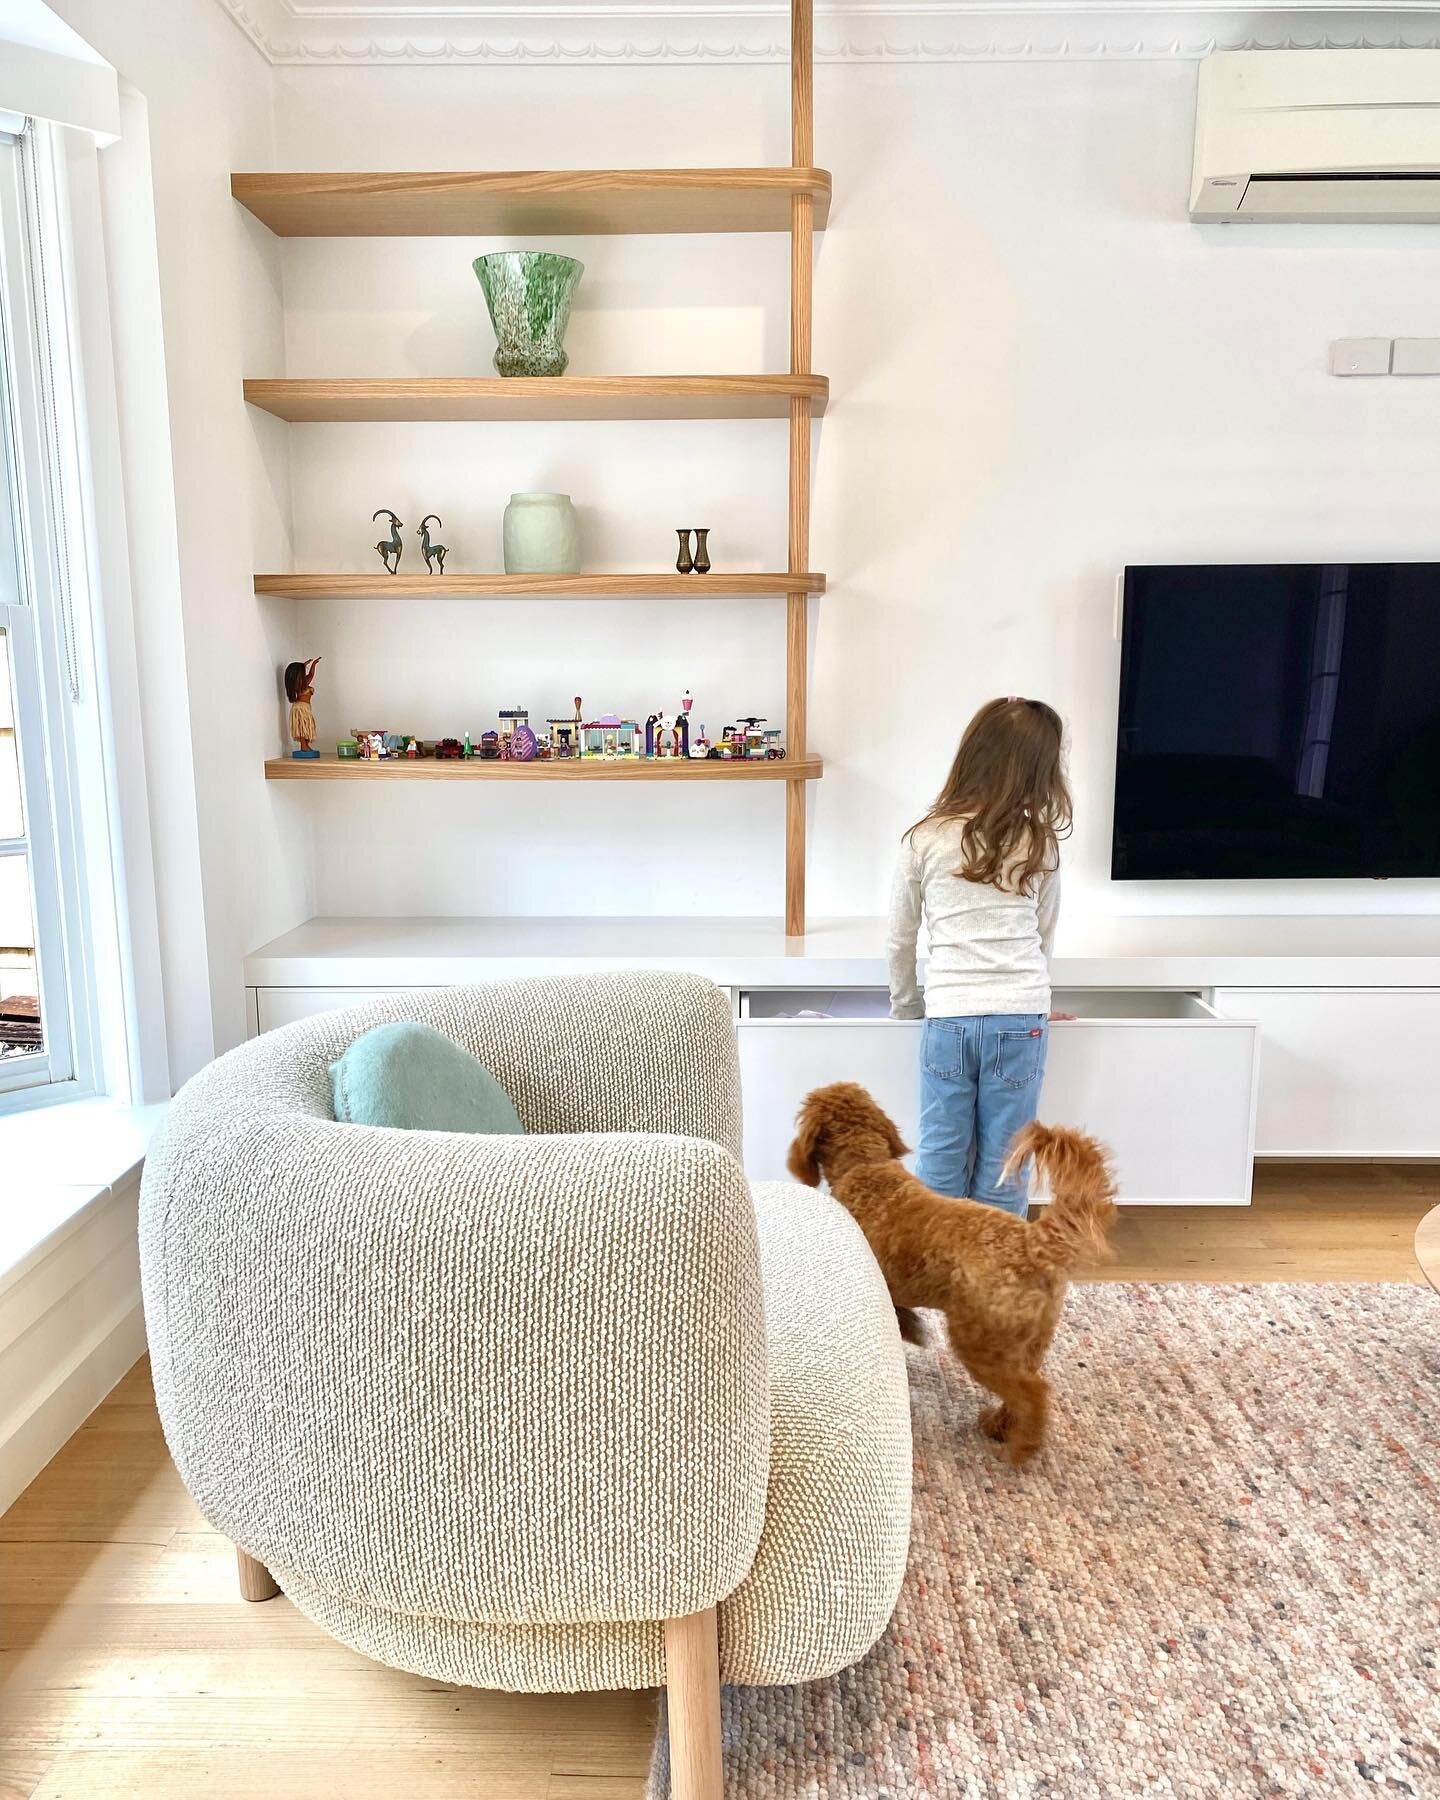 Take a look at this renovated living room! We're loving the feminine and soft neutral colour palette we used to design the shelving and entertainment unit. 

We took on a smaller job to help our client, who was having trouble finding someone to quote